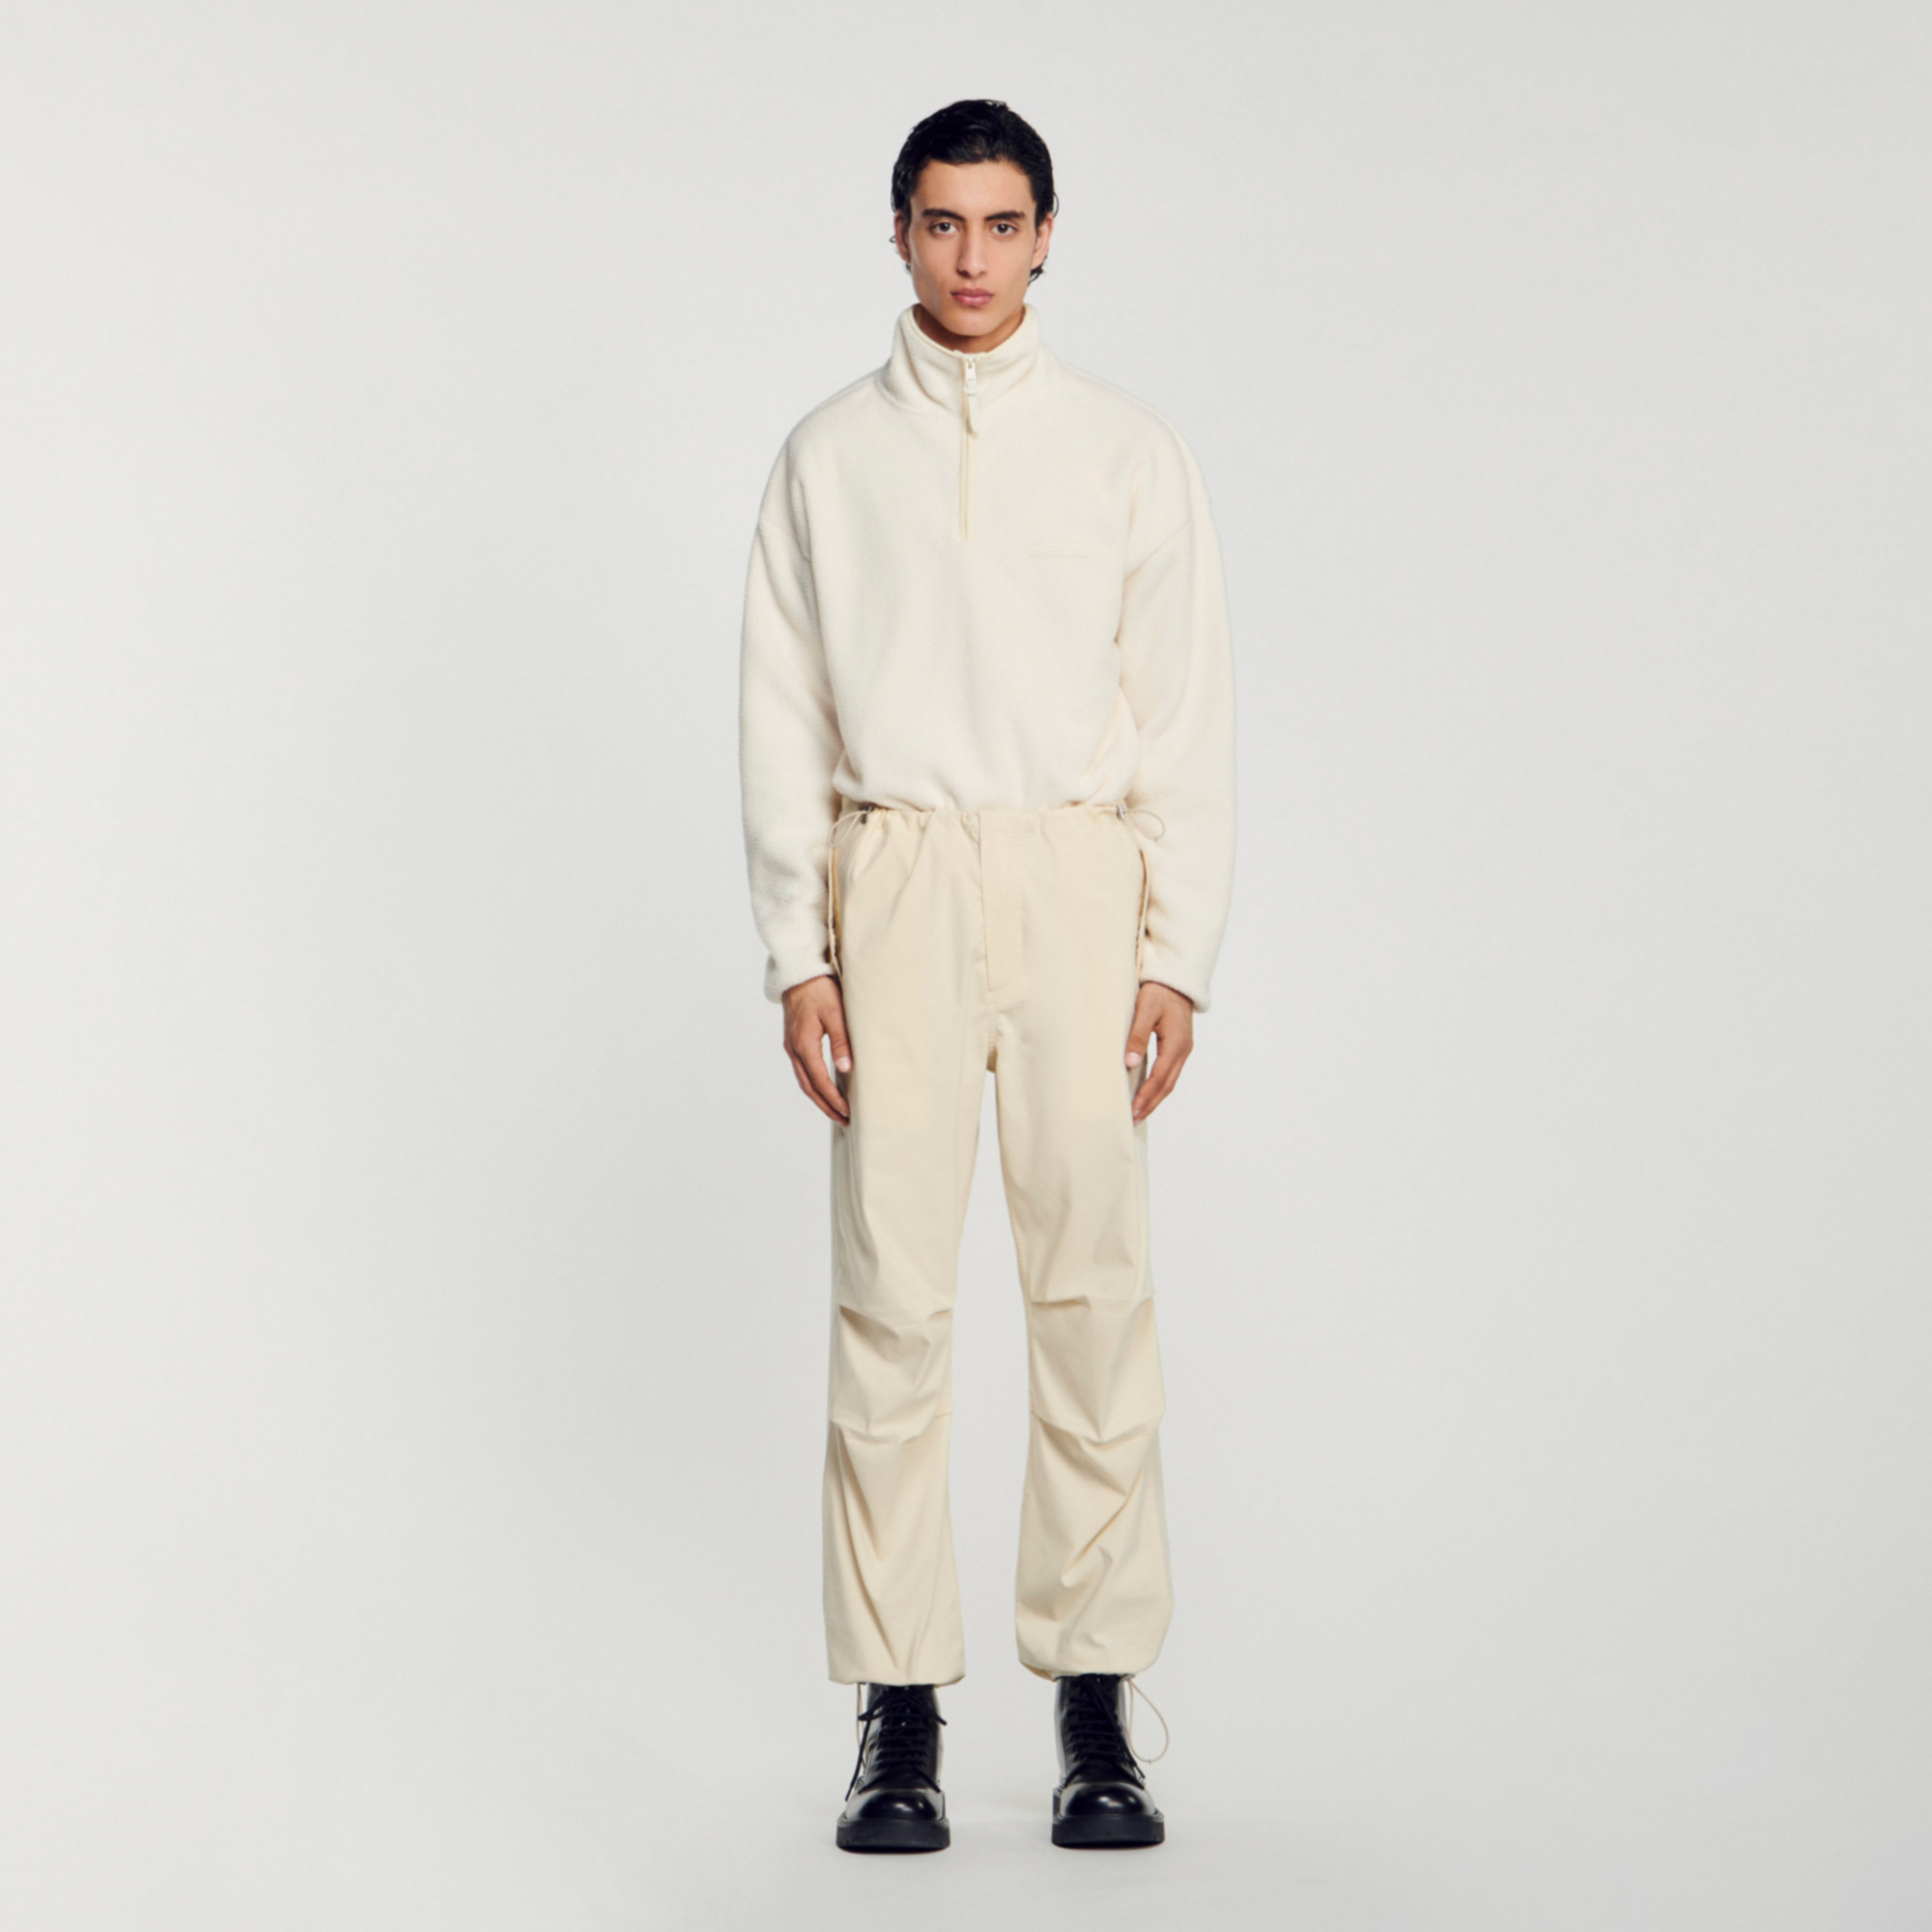 Sandro cotton Parachute pants with a baggy fit, side pockets, and elastics with cord locks at the waist and ankles